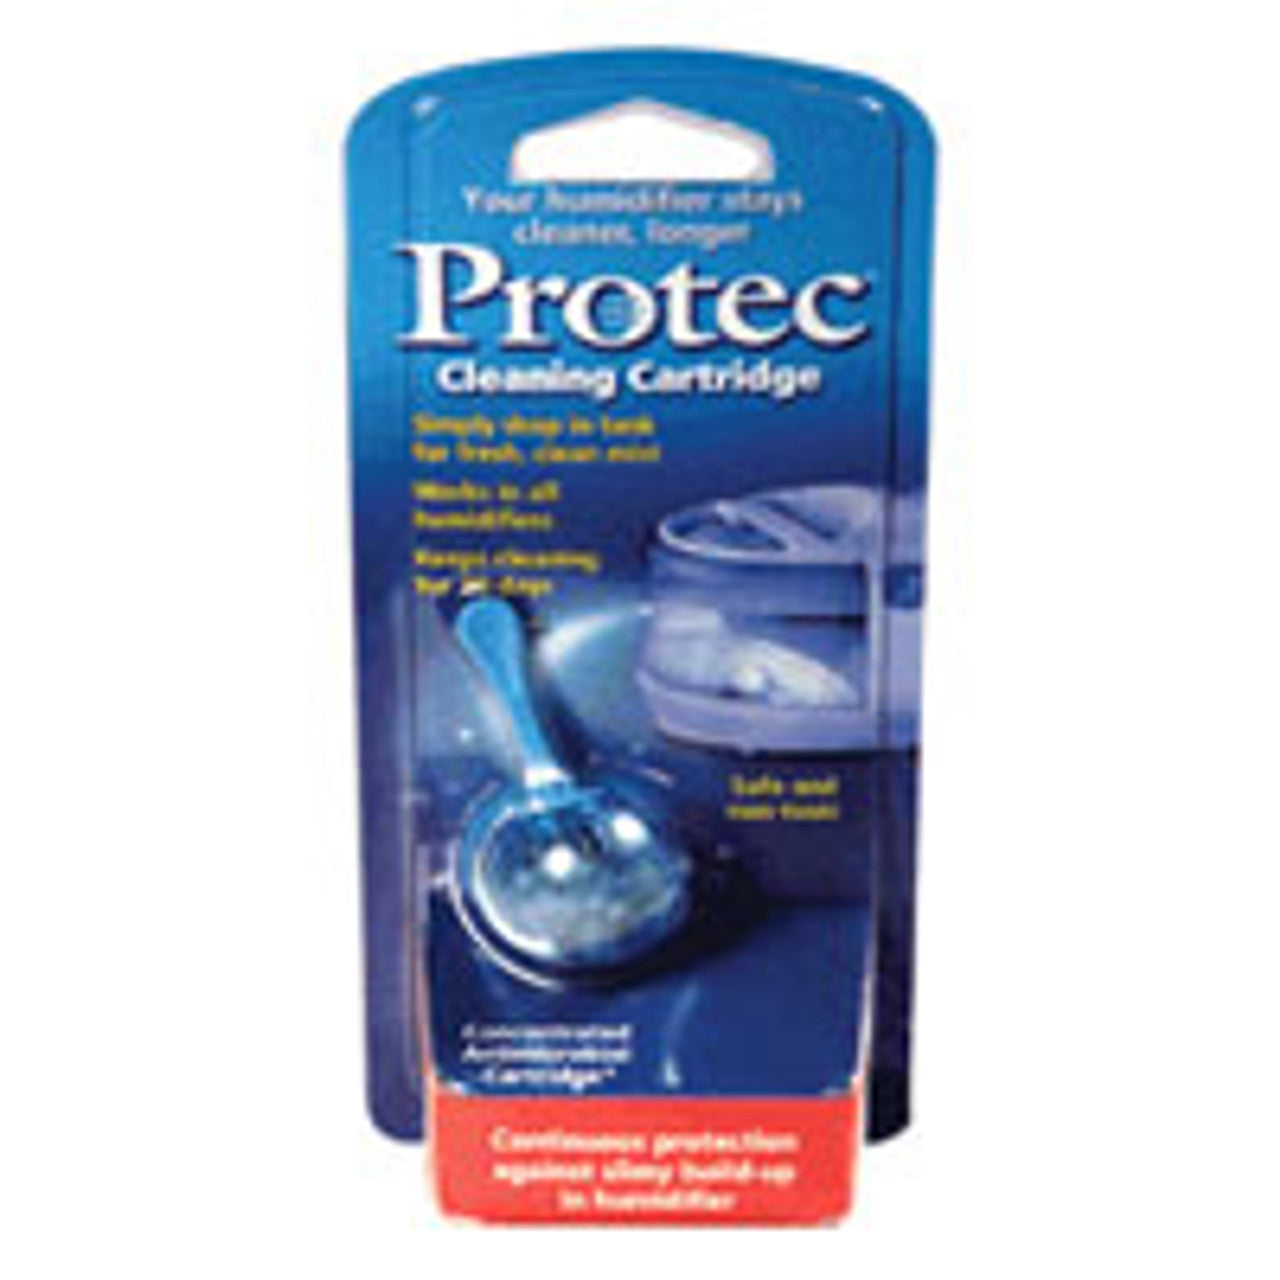 Protec Humidifier Tank Cleaning Cartridge, Pc-1